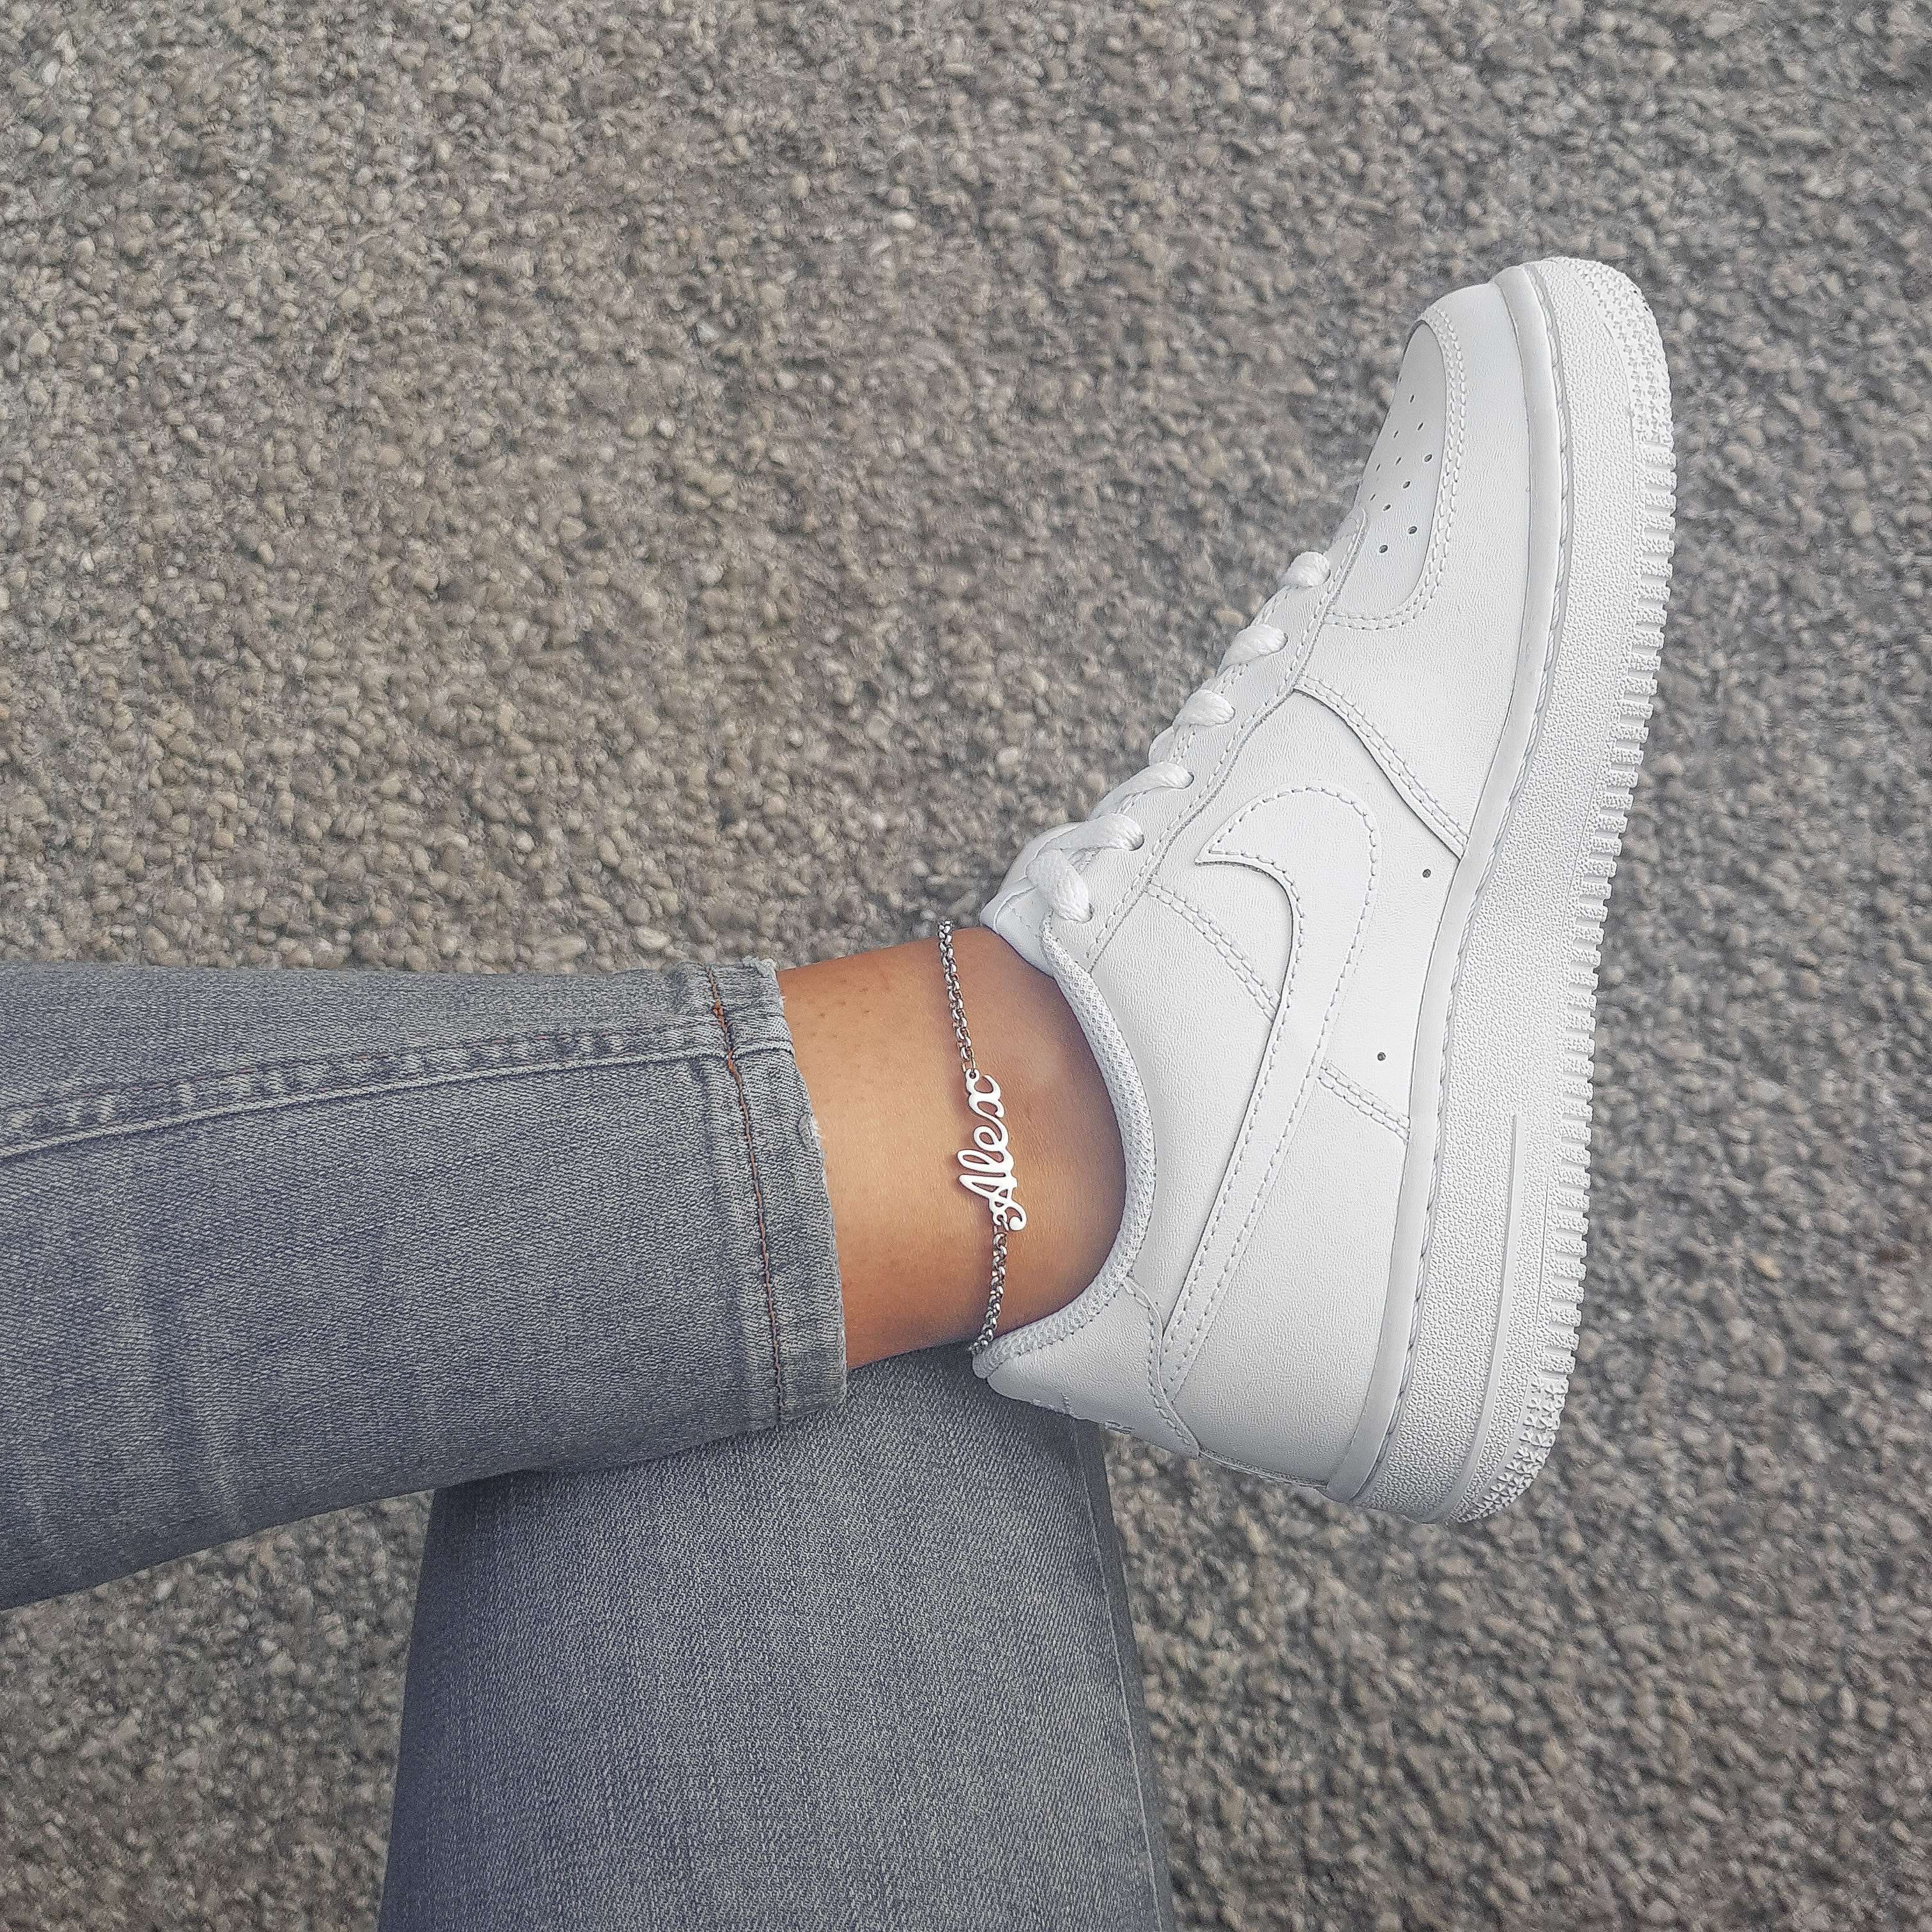 Silver Miami customised name anklet worn by a woman wearing light jeans and white trainers